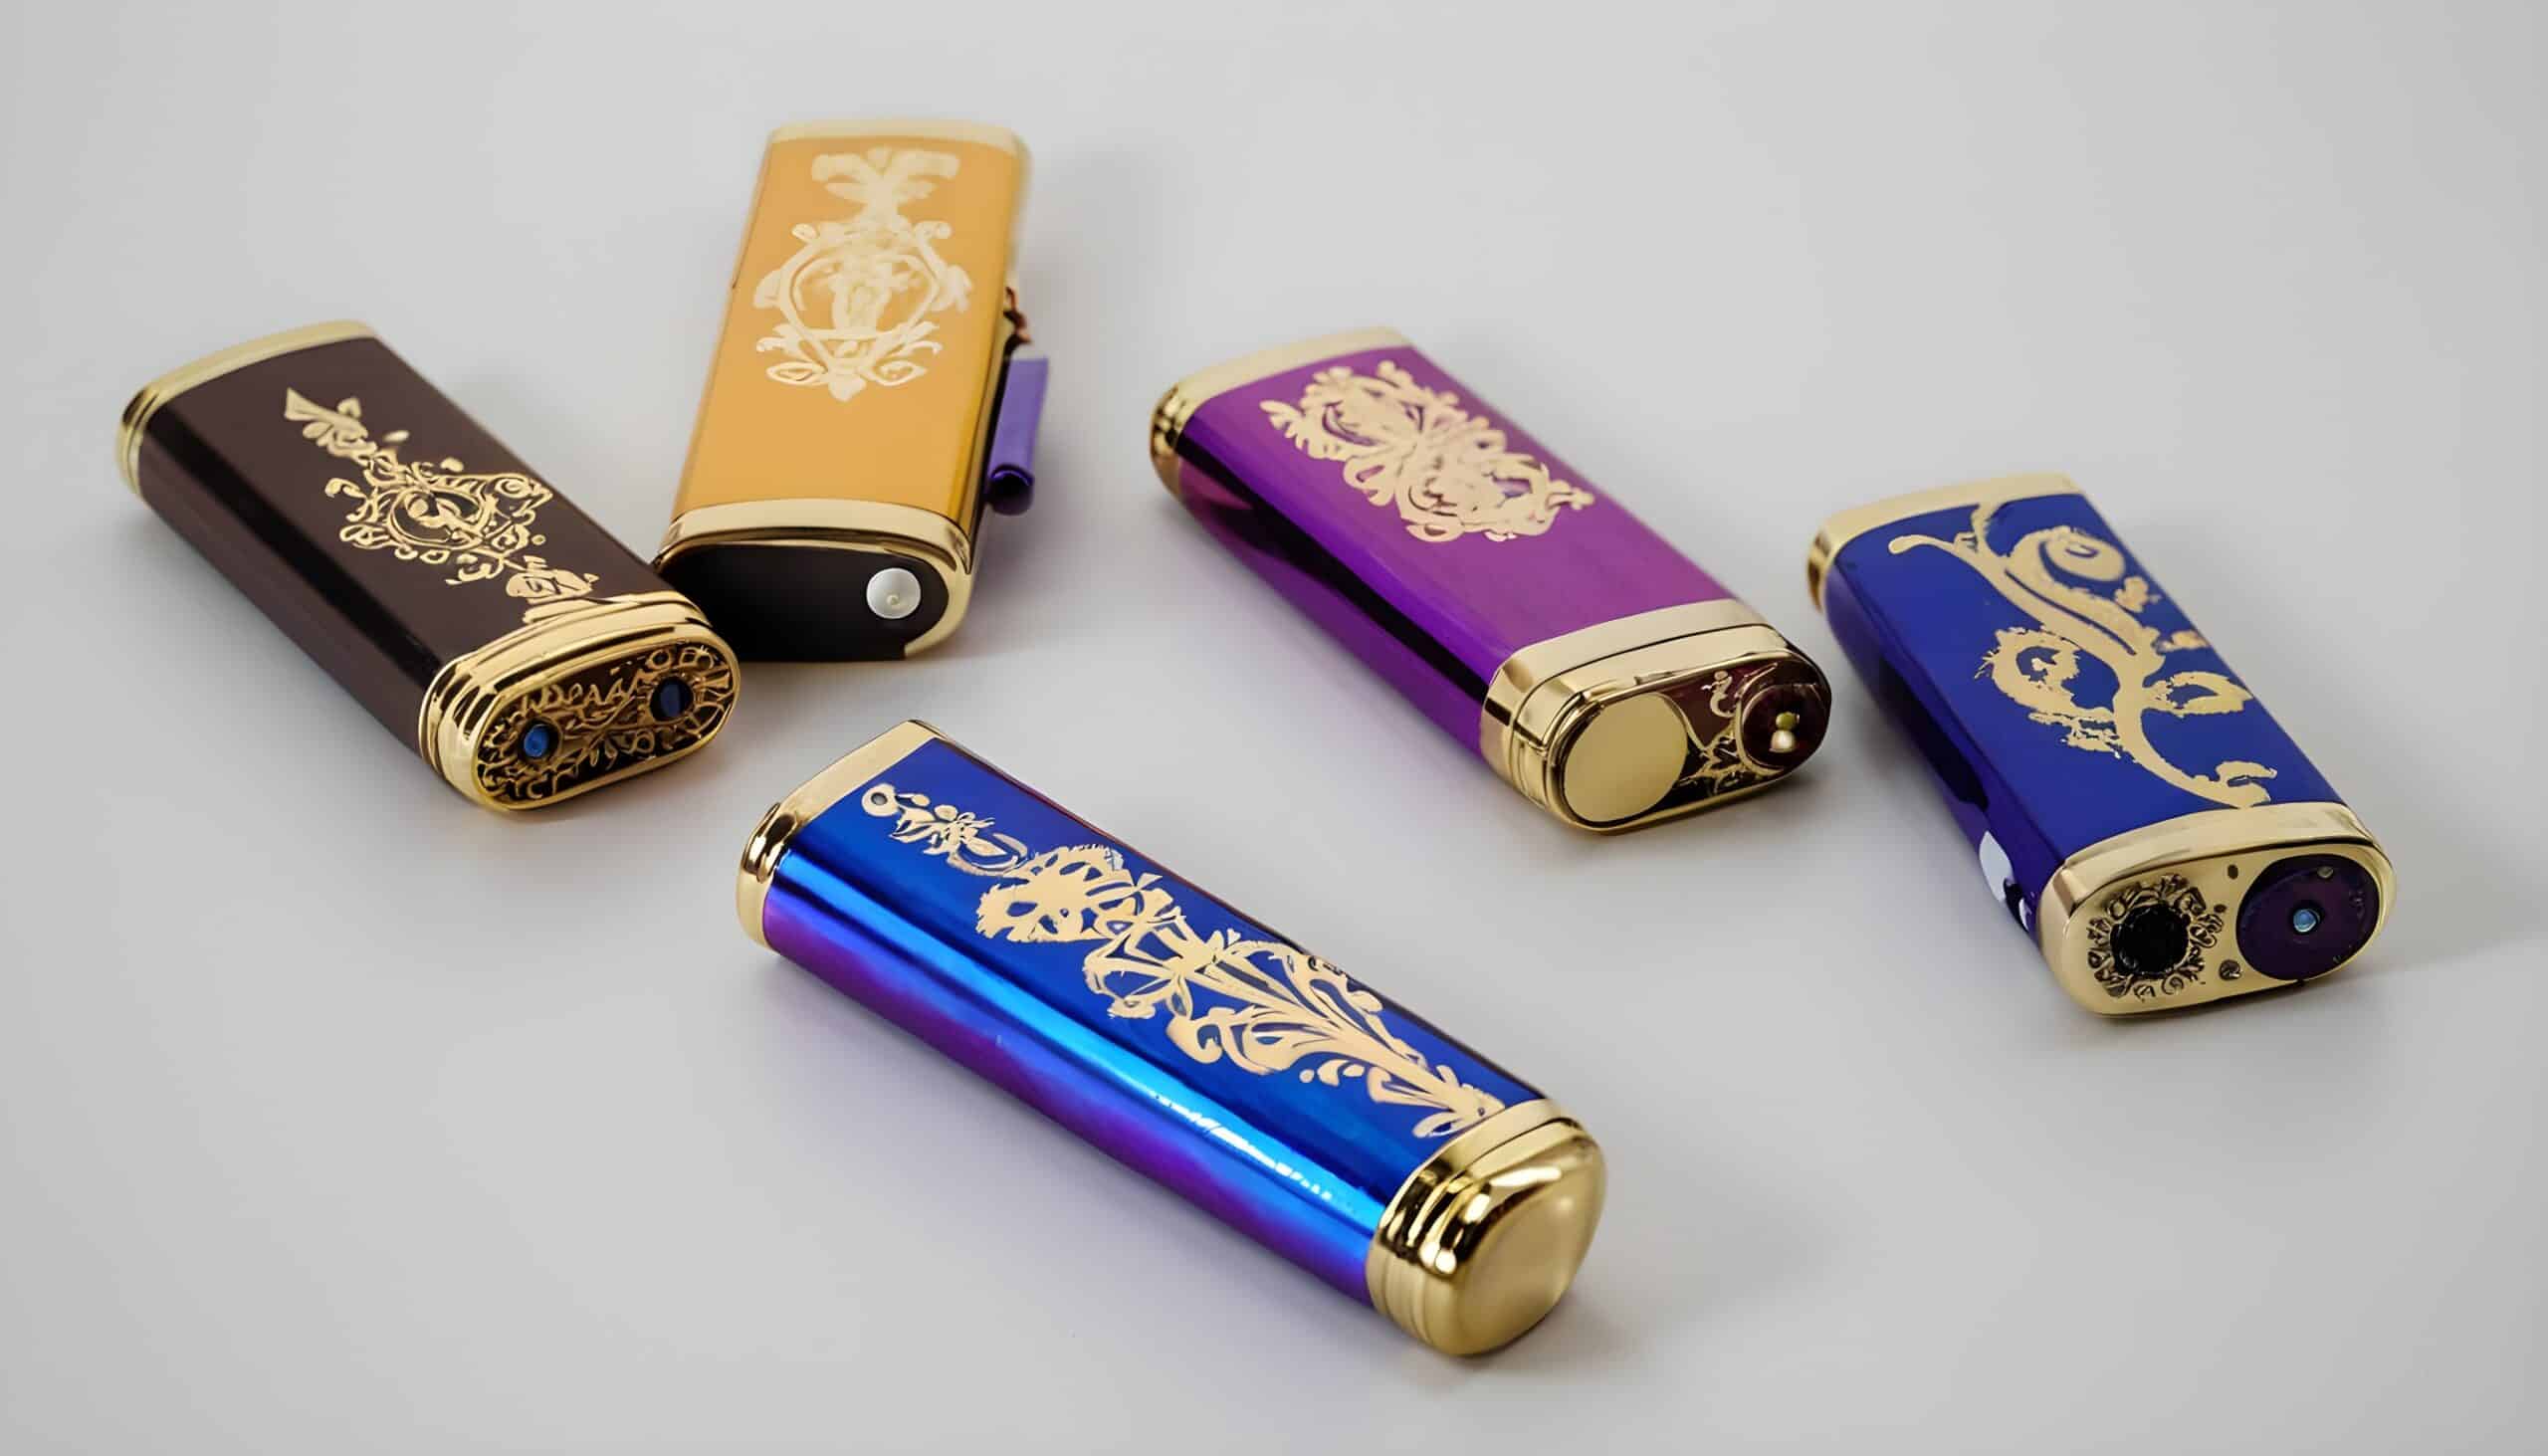 5 fancy lighters on a white surface